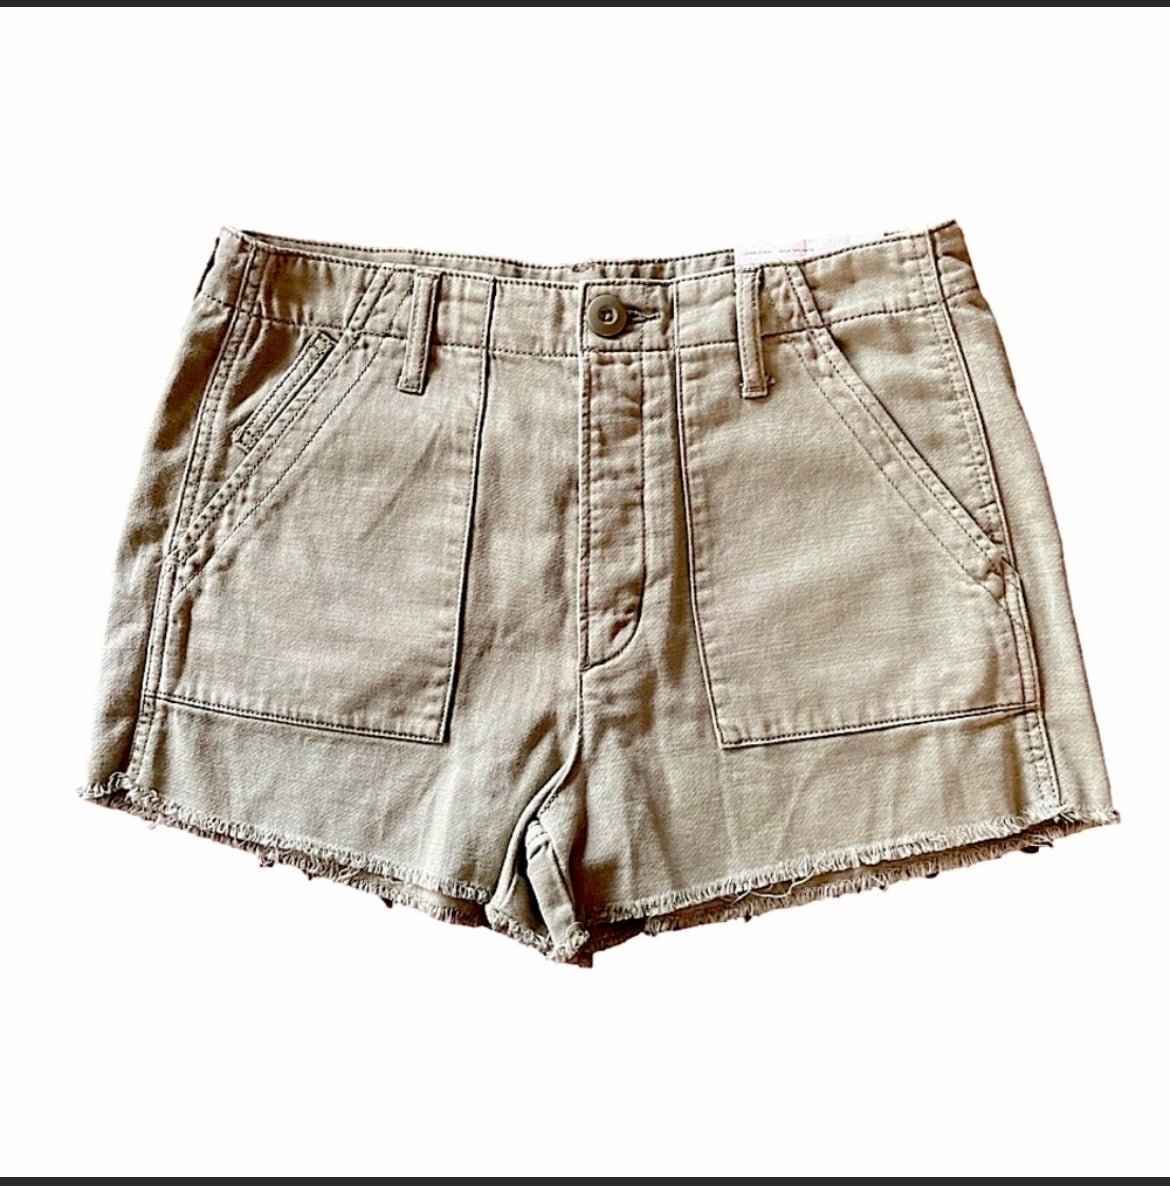 Buy American Eagle Women’s shorts NWT GeAmNHr04 US Outl